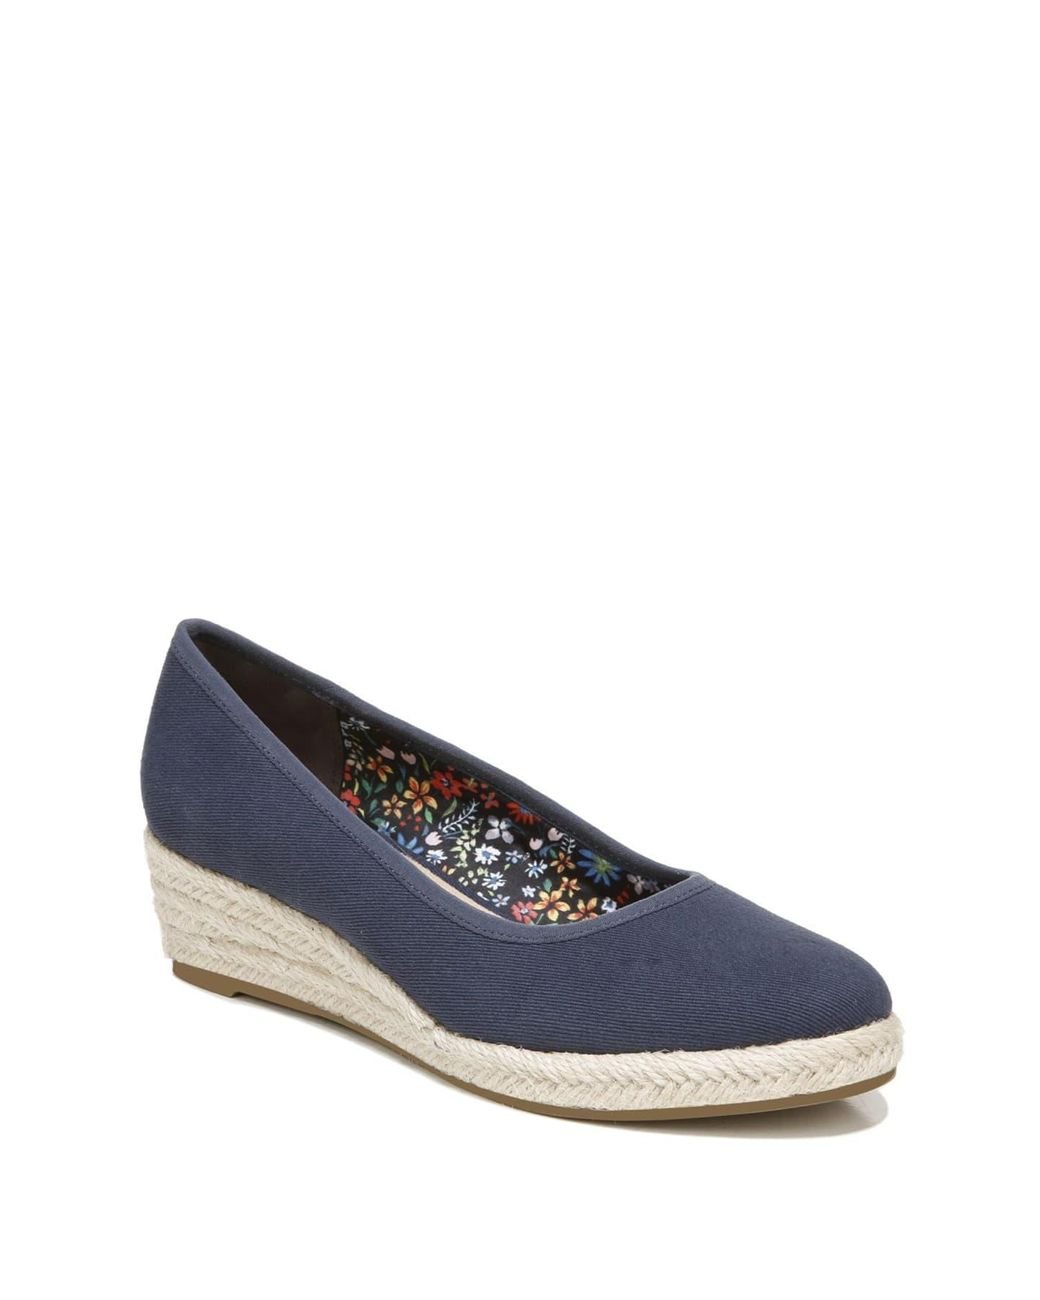 LifeStride Synthetic Karma Espadrille Wedge Flat in Navy (Blue) - Lyst